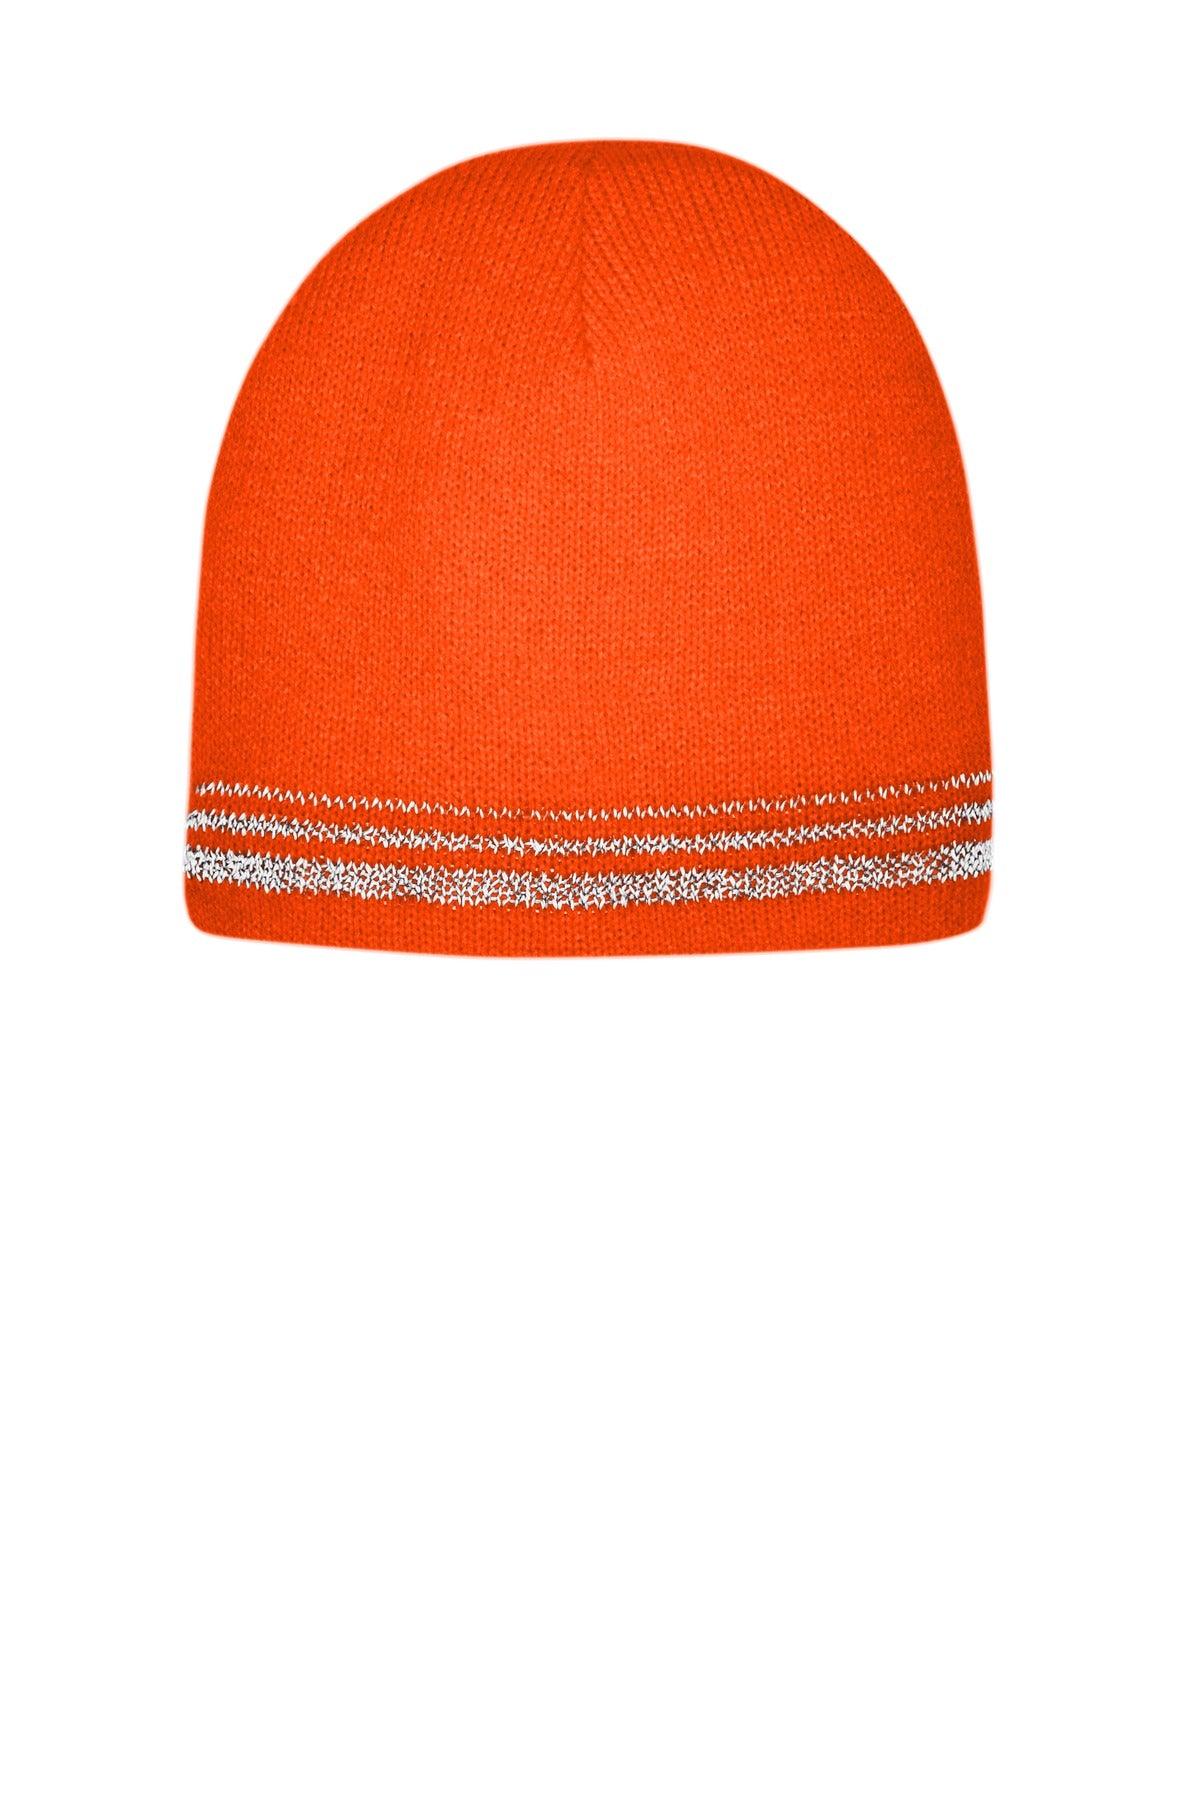 CornerStone Lined Enhanced Visibility with Reflective Stripes Beanie CS804 - Dresses Max